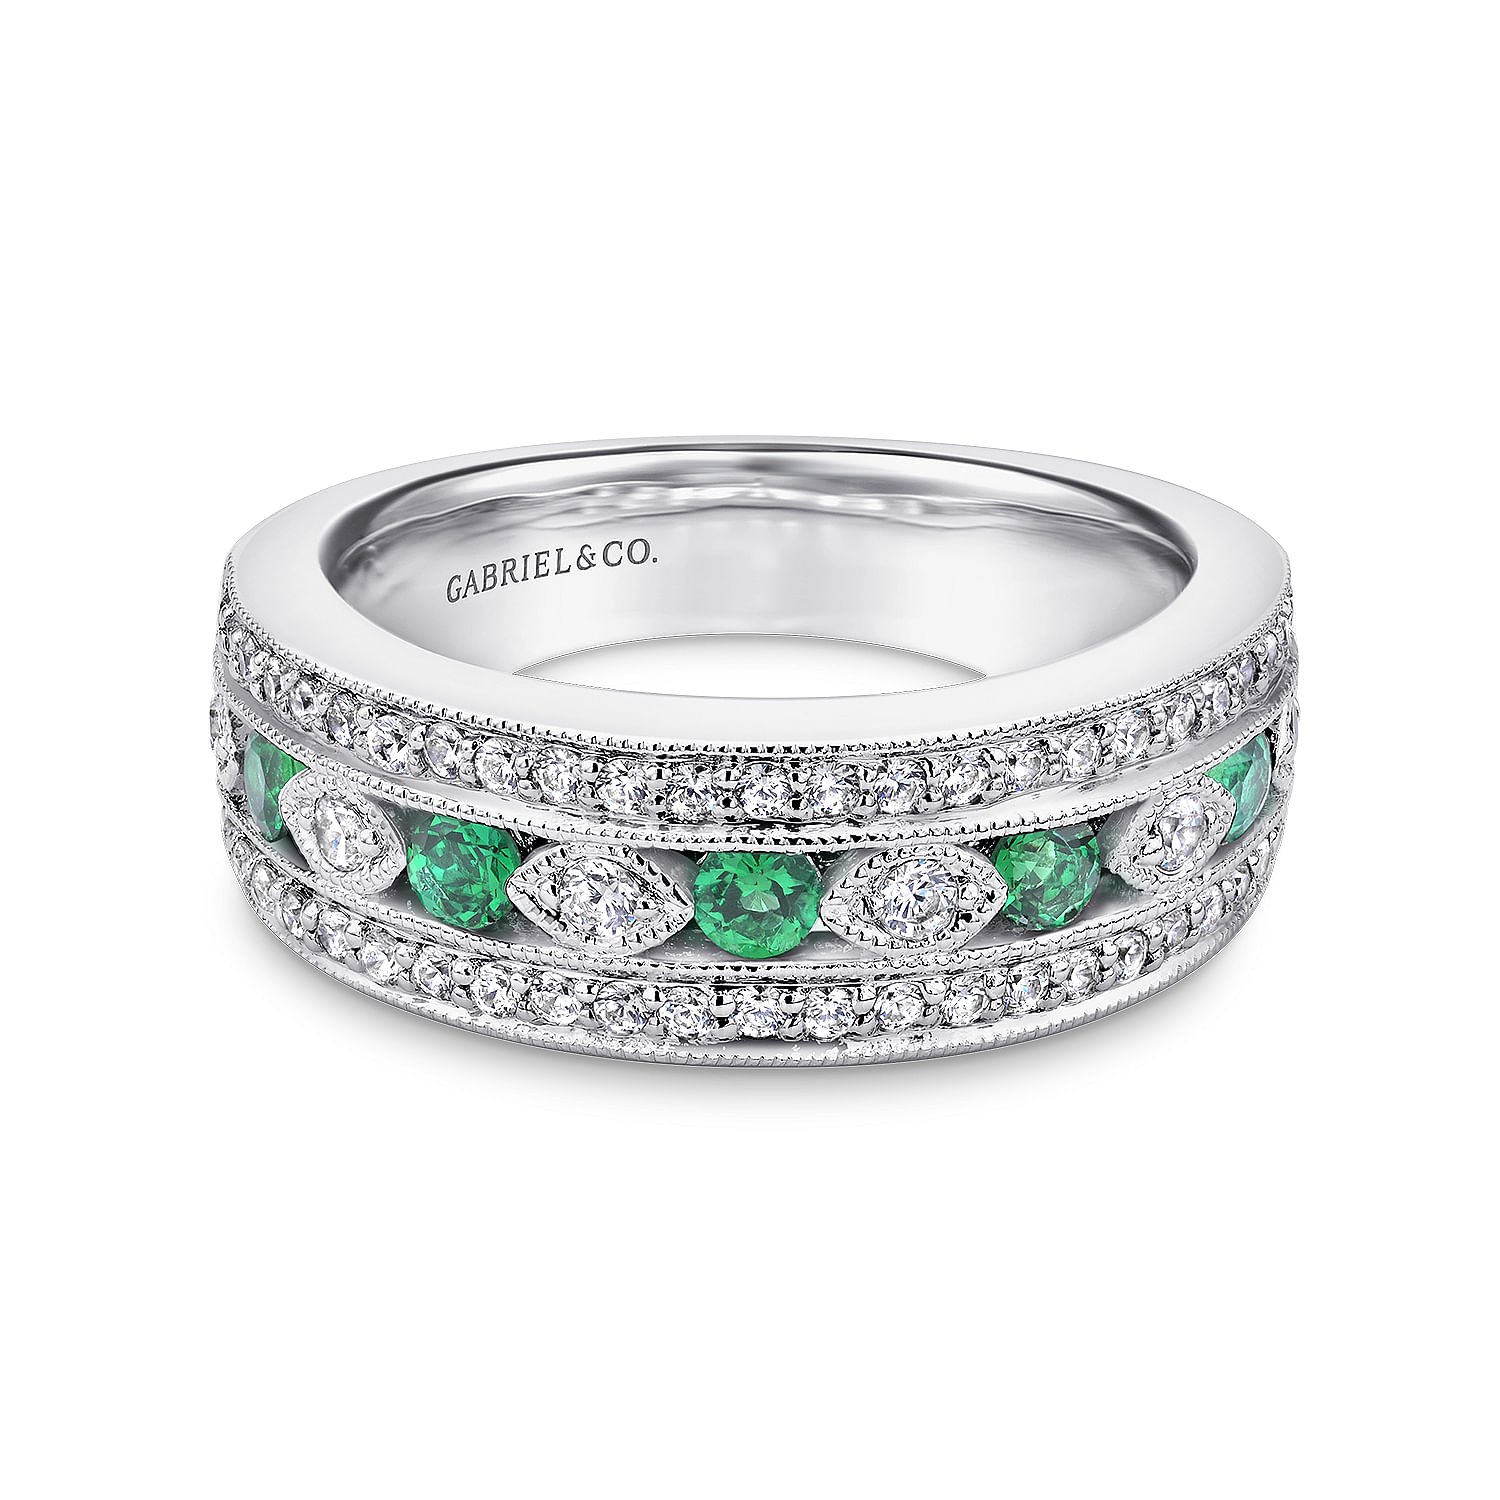 14K White Gold Vintage Inspired Emerald and Diamond Ring